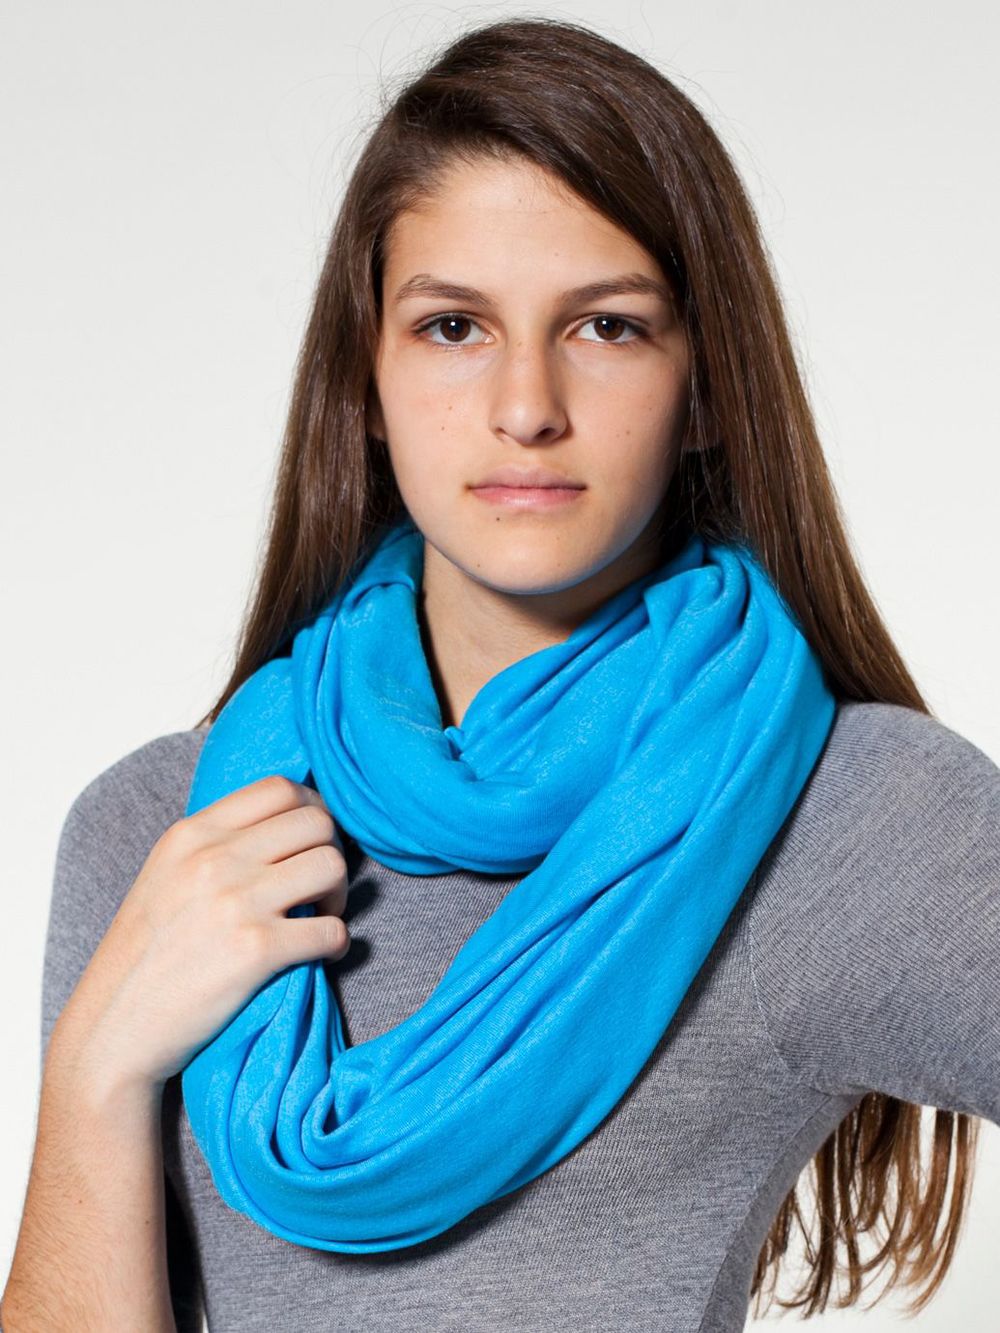  The Unisex Circle scarf. Available in endless colors. American Apparel. Was: $28 Now: $14.  